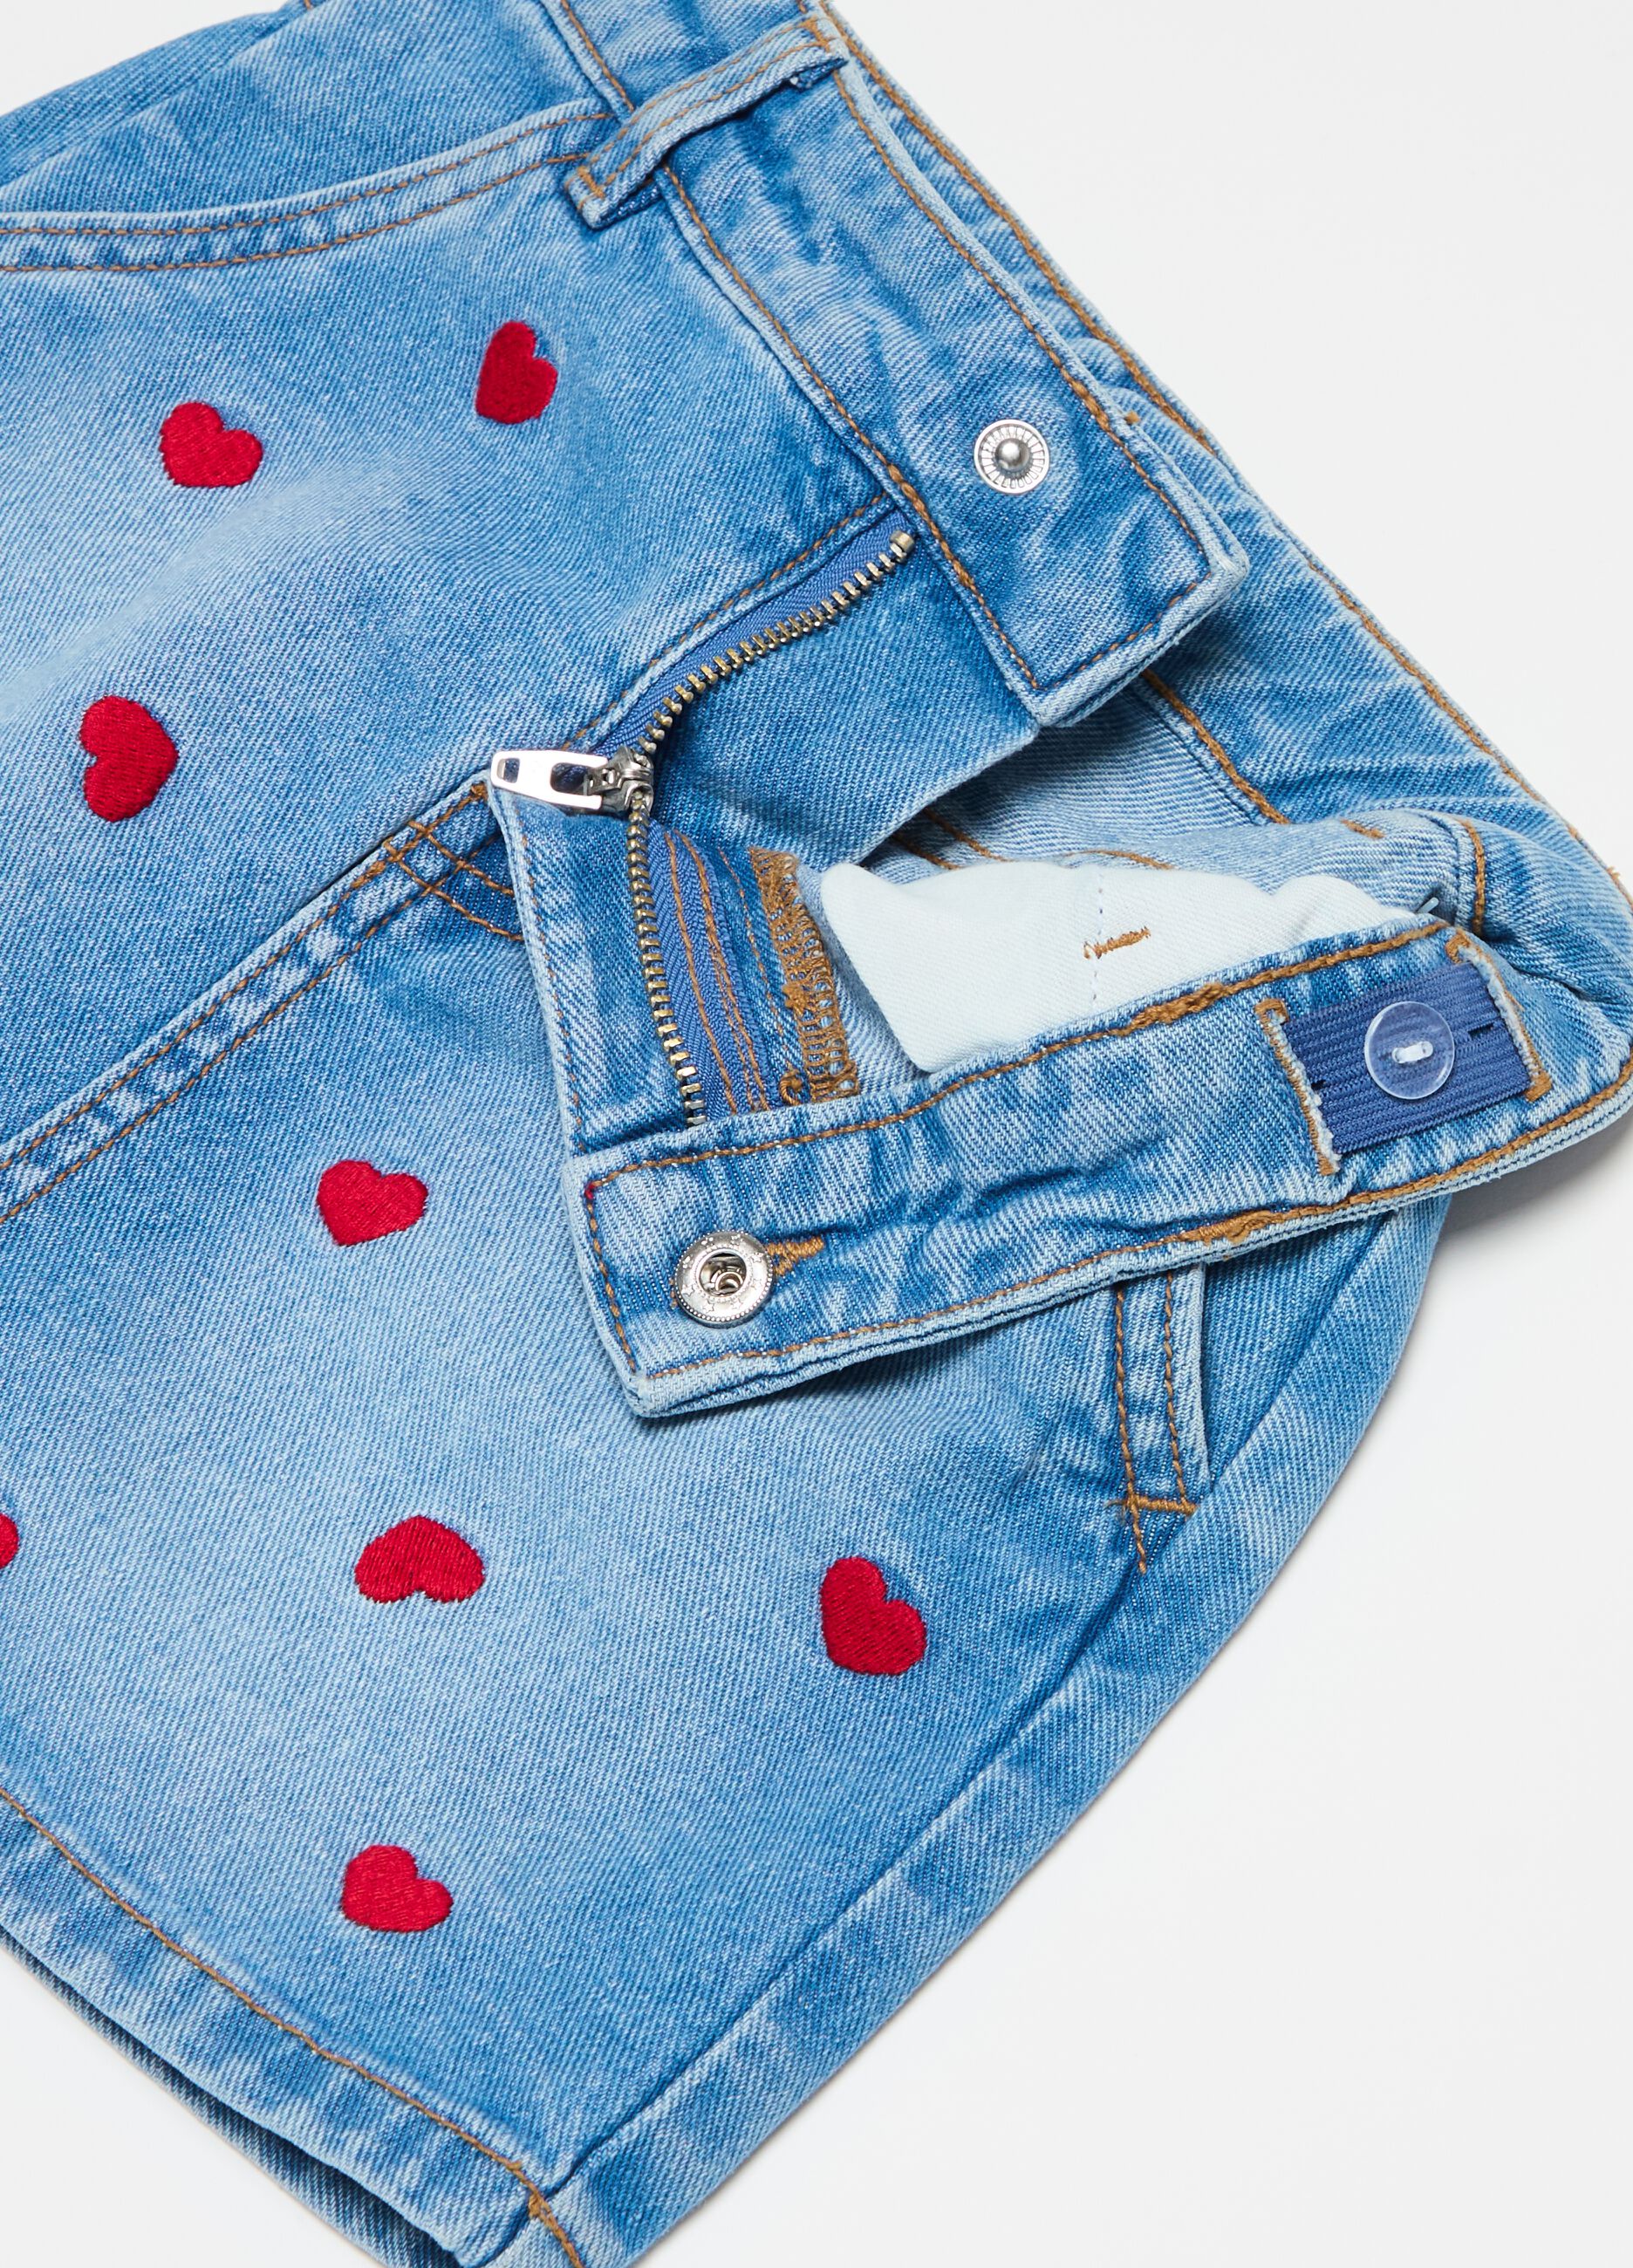 Denim miniskirt with hearts and Minnie Mouse embroidery